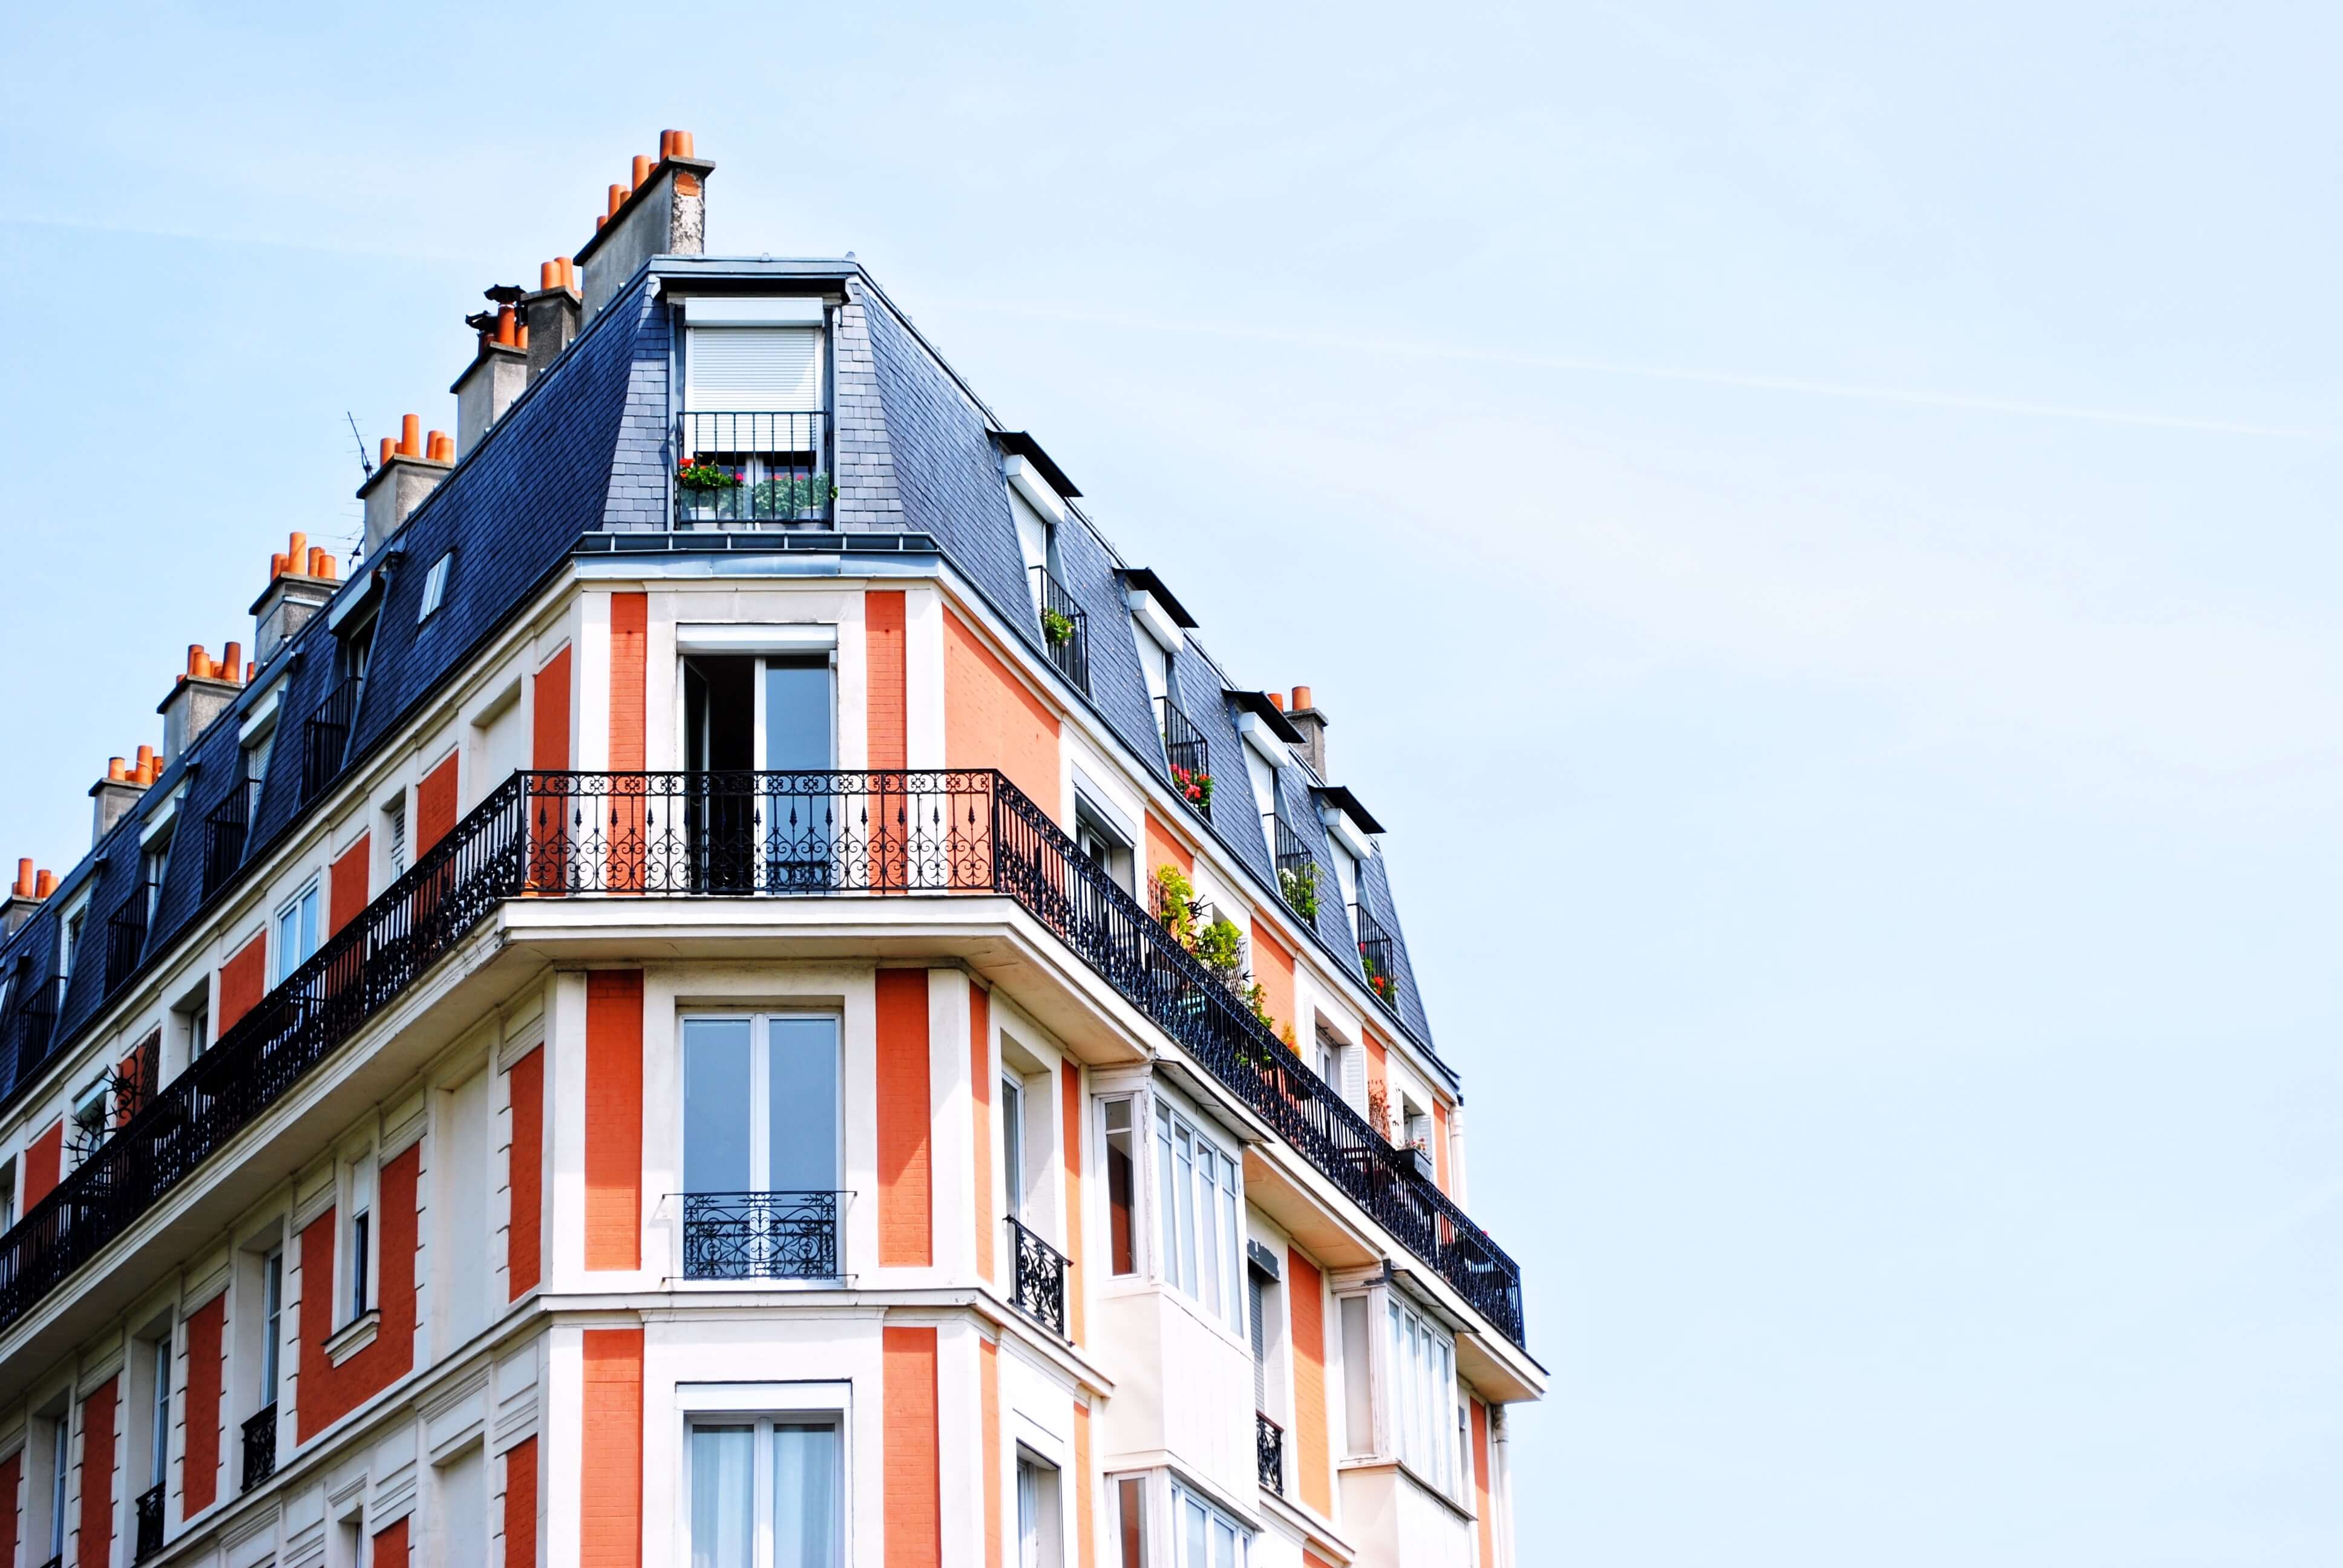 How it is done in the real estate business within France